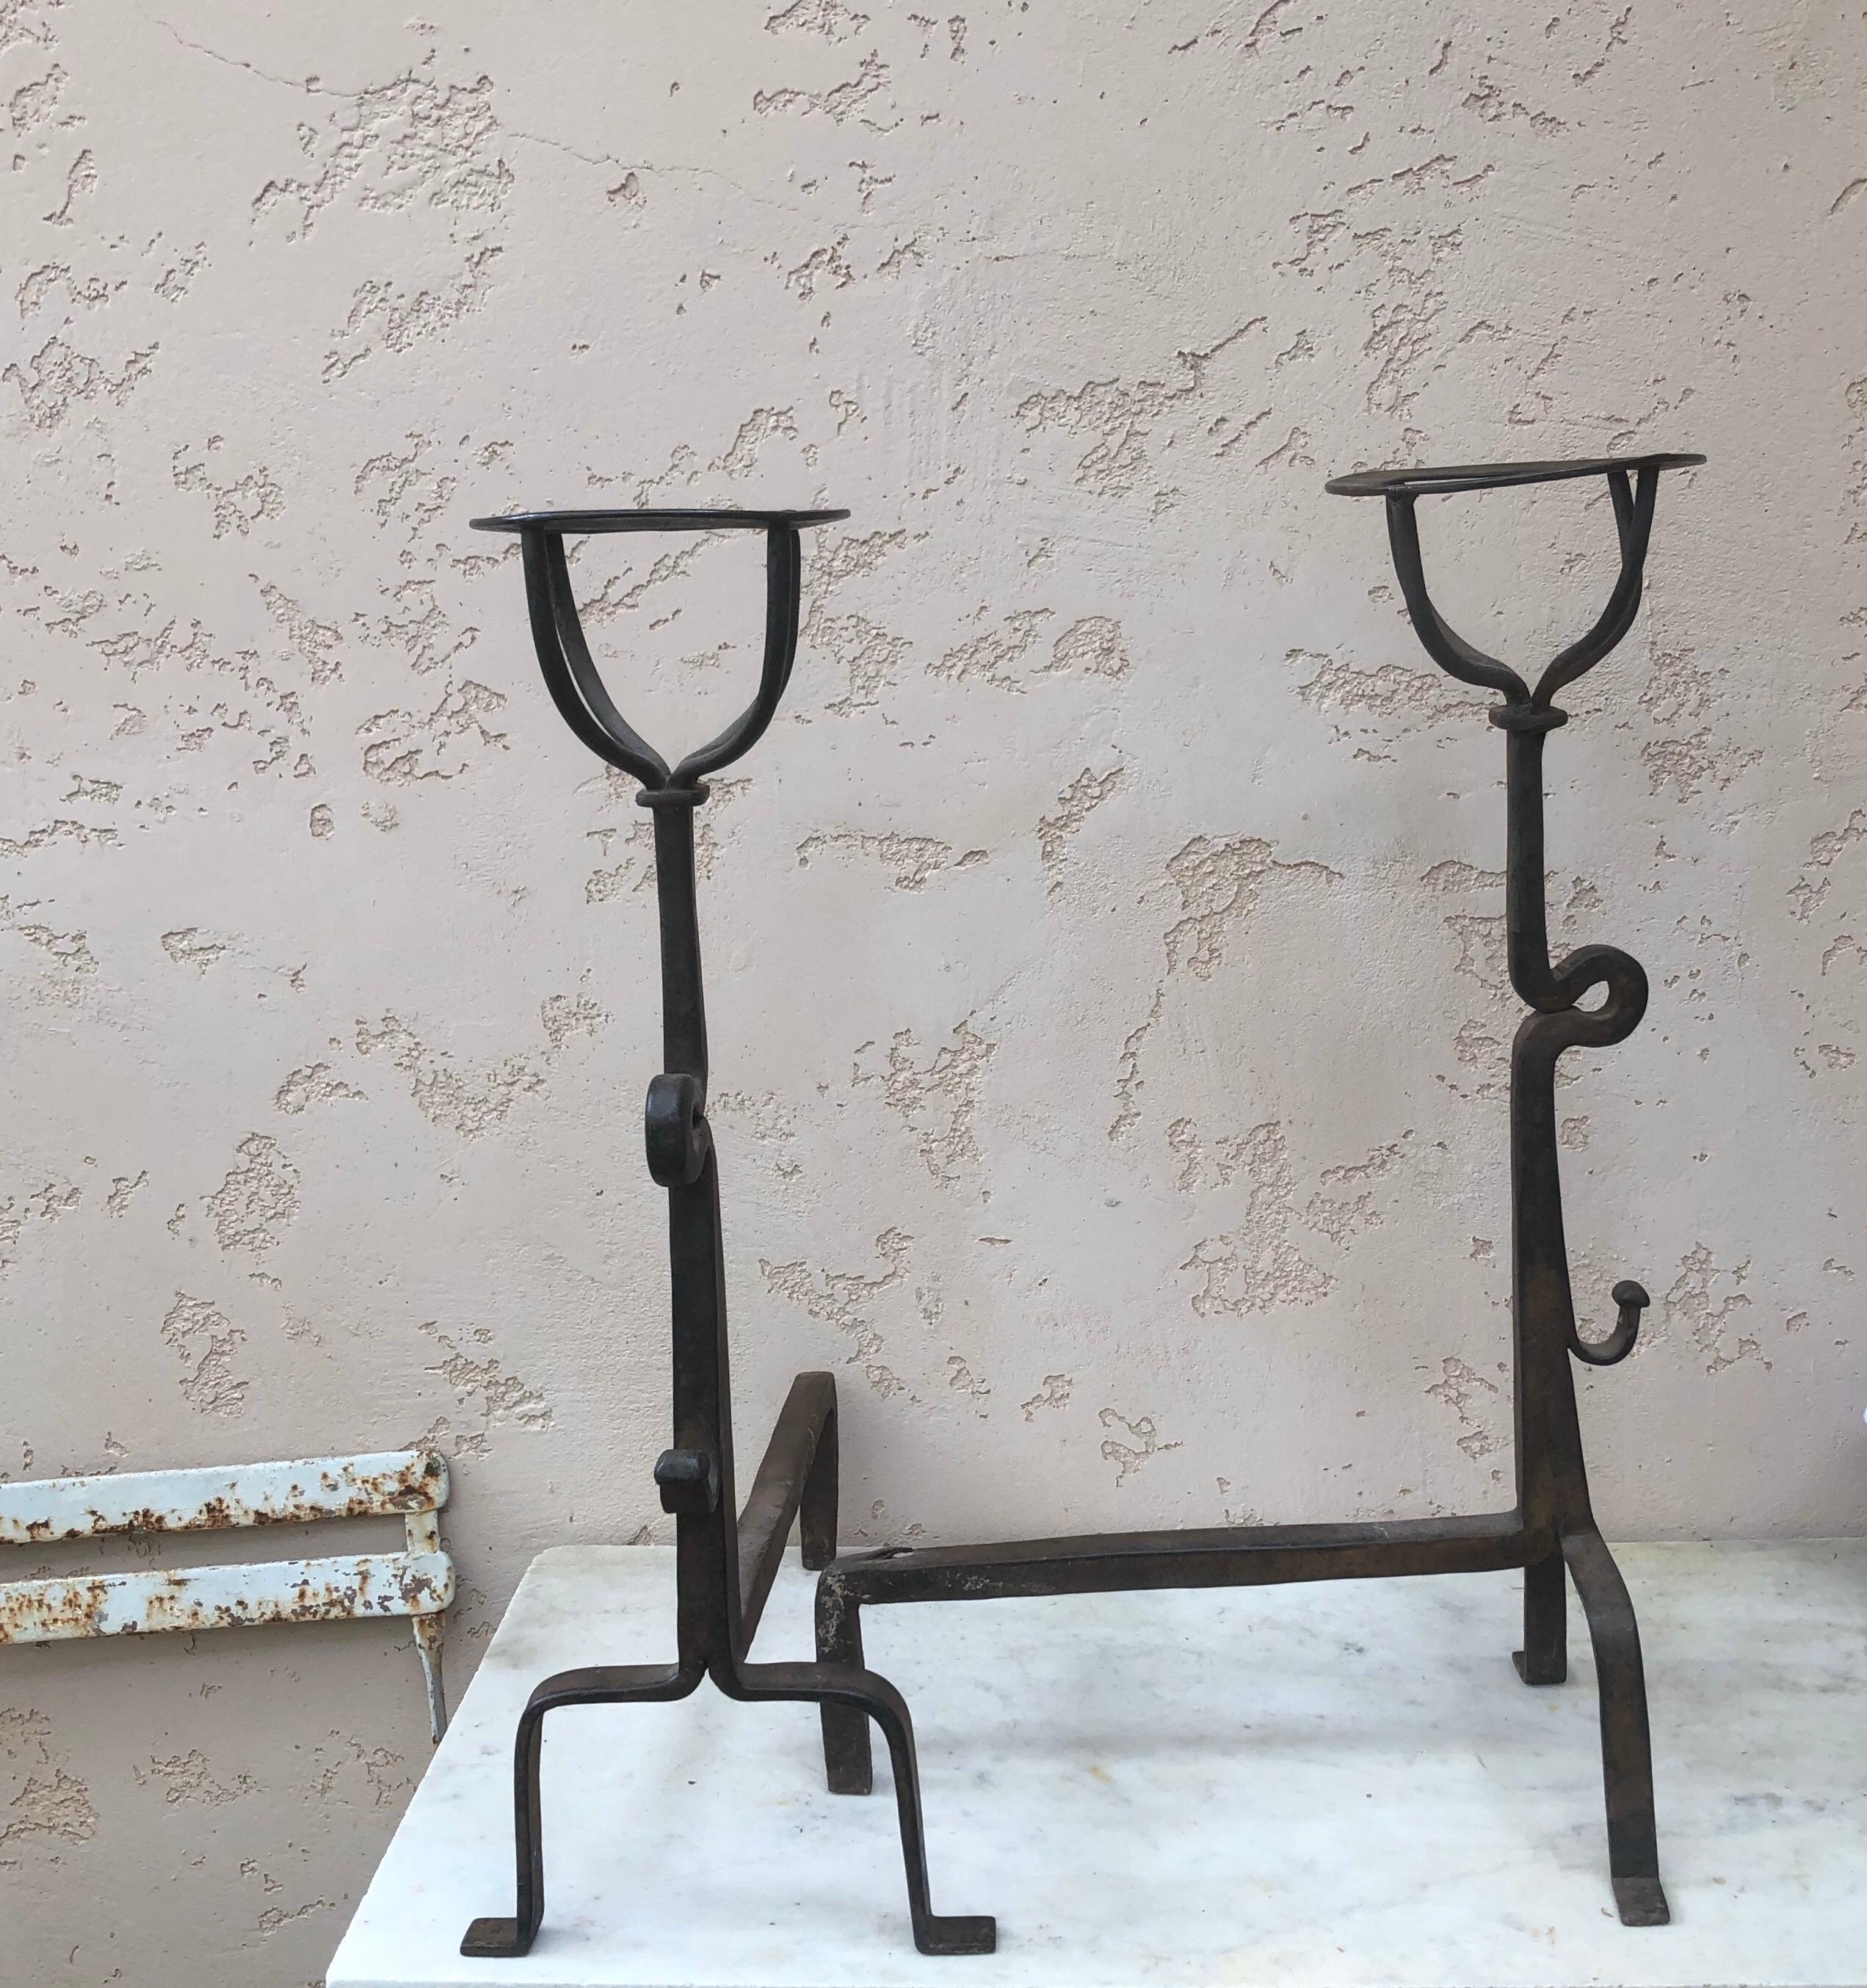 Pair of large 19th century cast iron andirons from Normandy.
Measures: 10